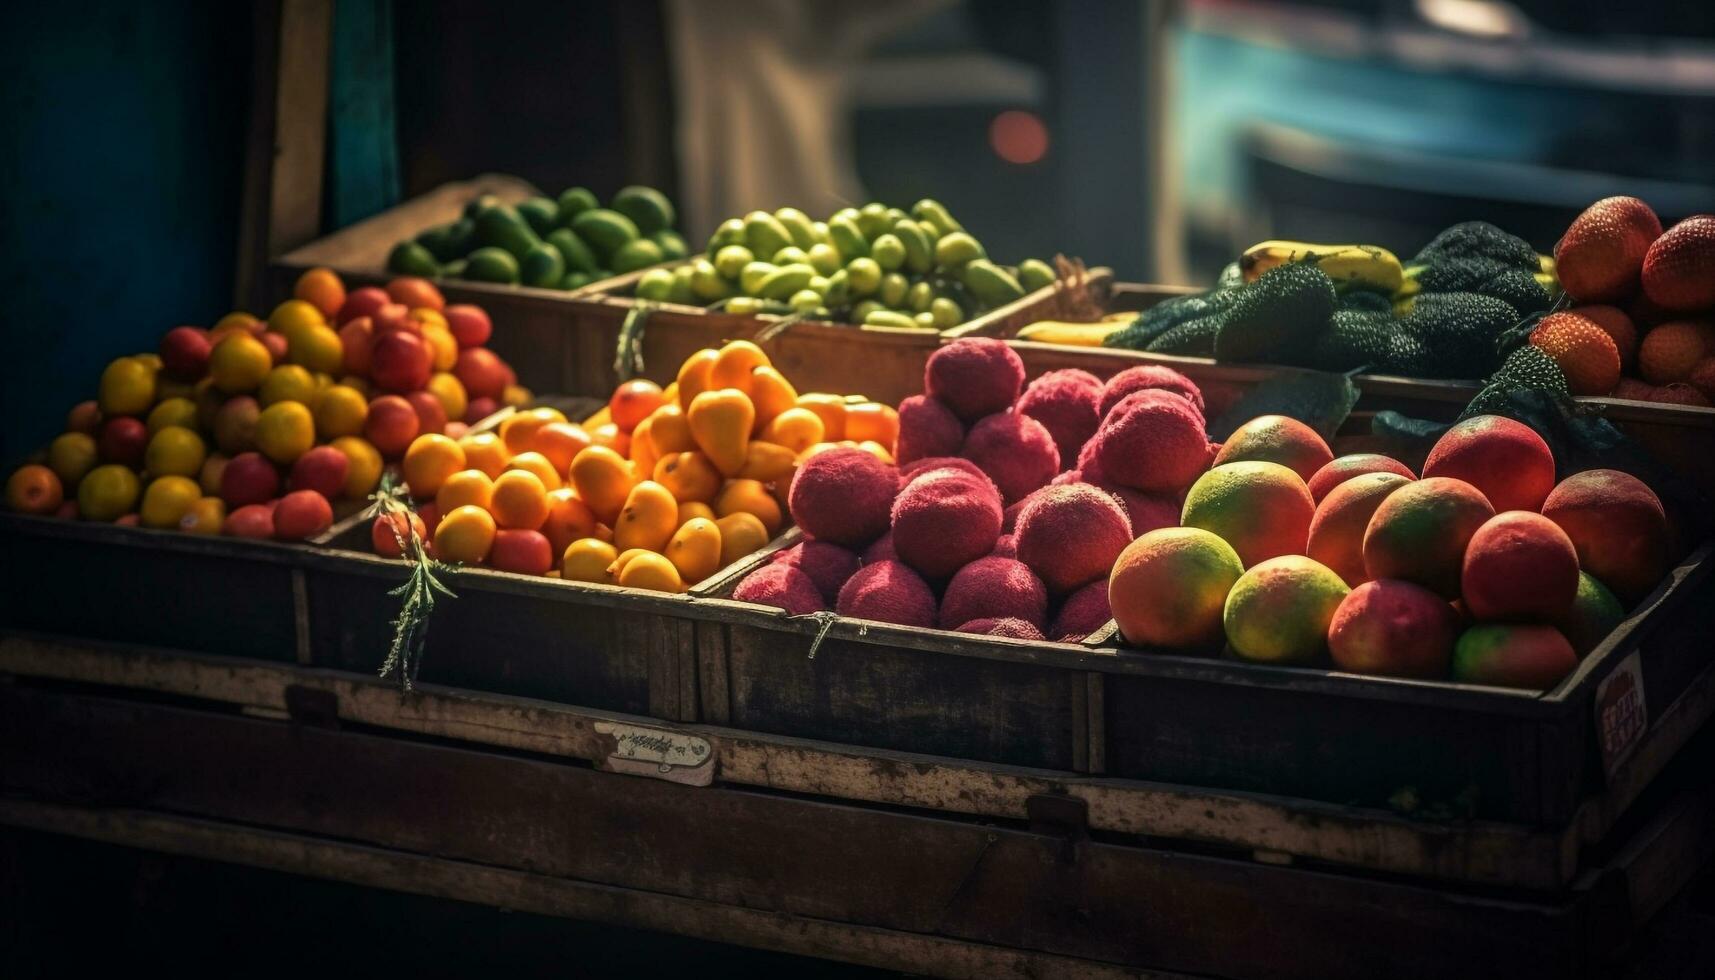 Abundance of fresh, ripe, juicy fruits and vegetables generated by AI photo